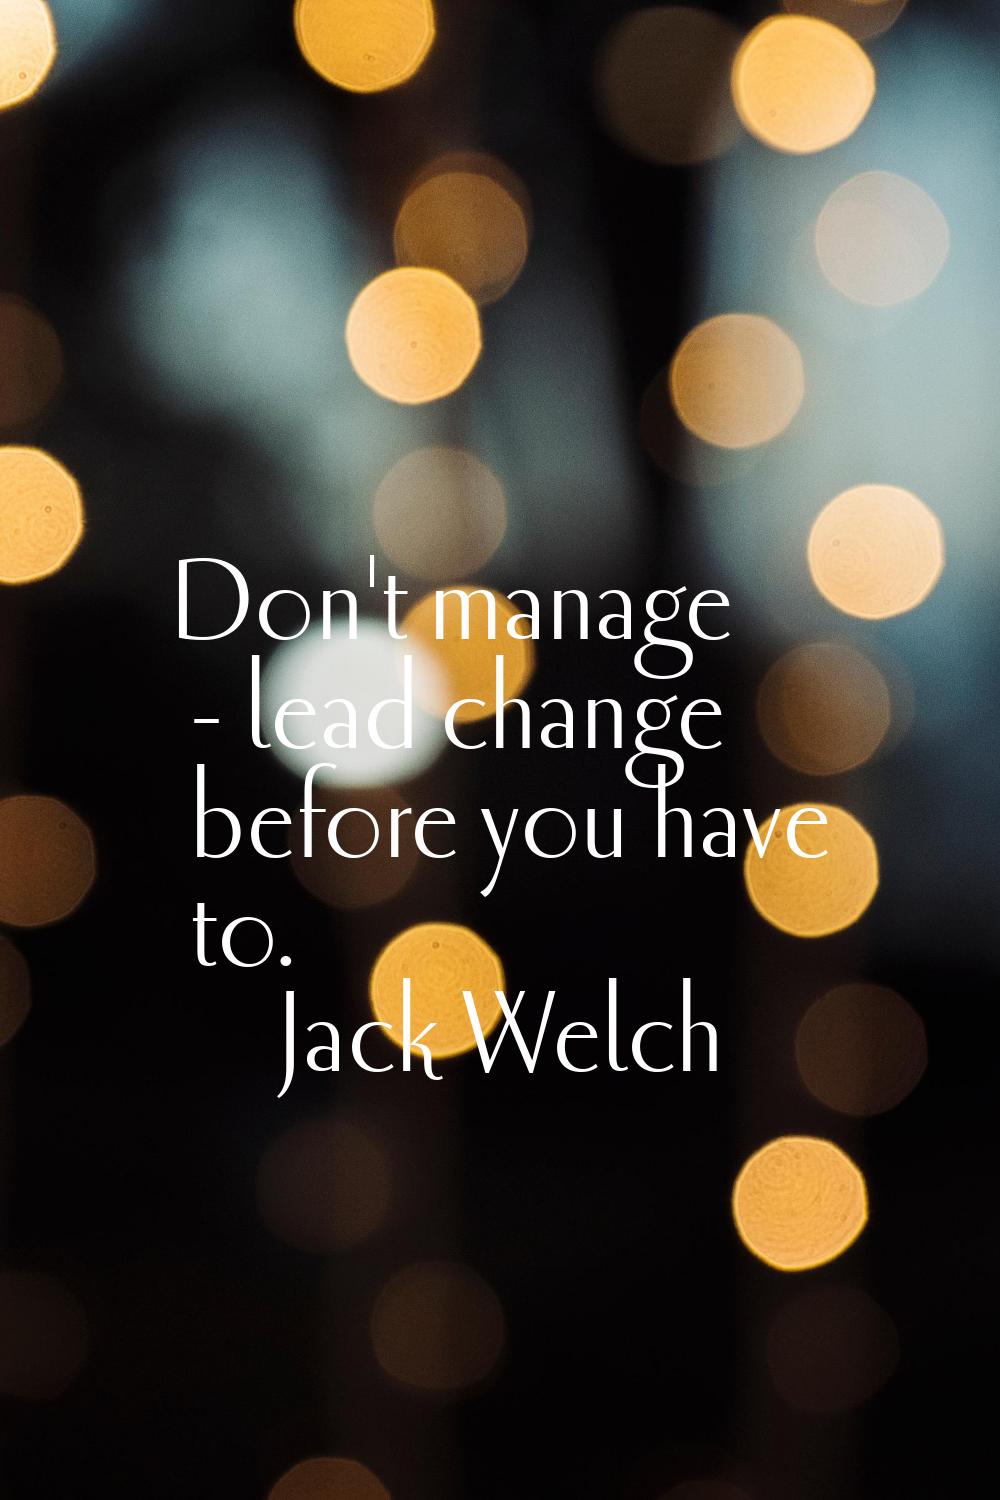 Don't manage - lead change before you have to.